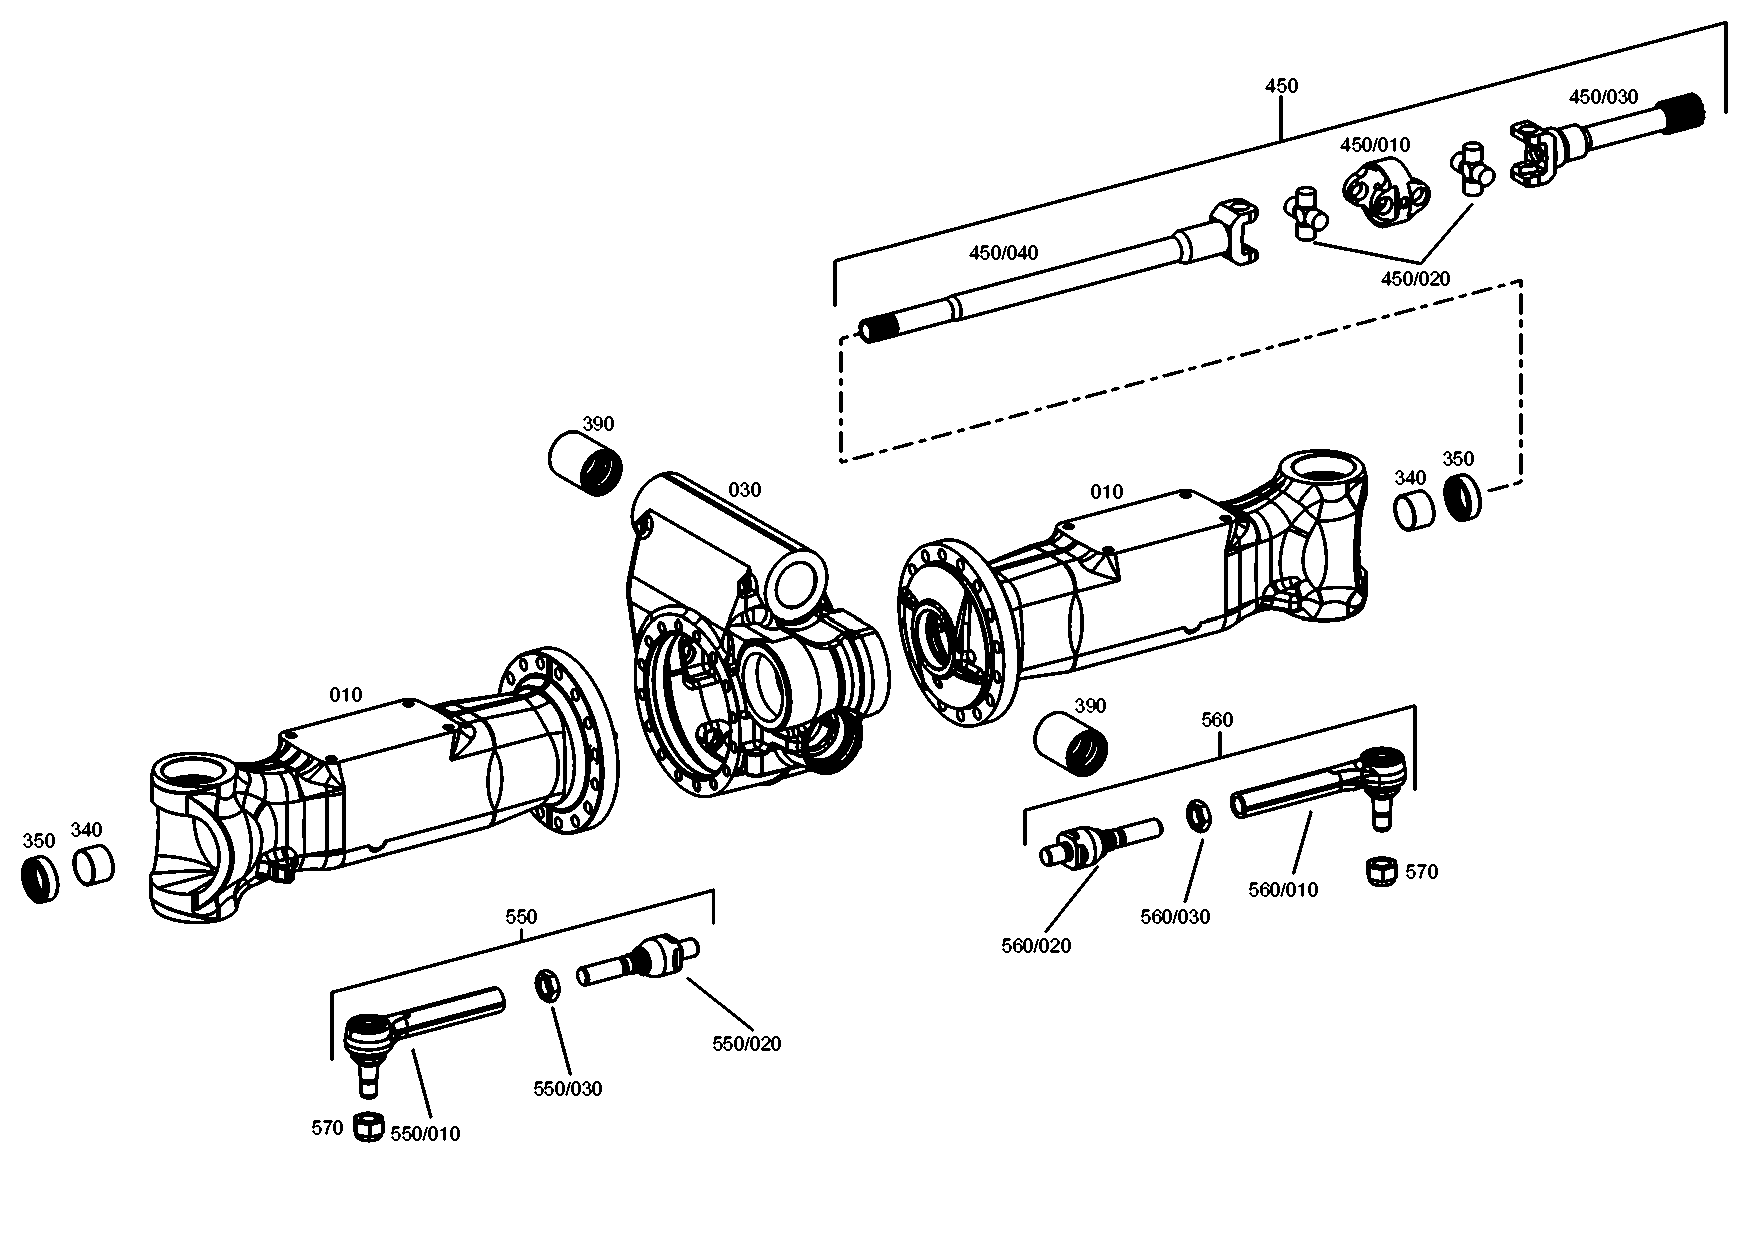 drawing for SENNEBOGEN HYDRAULIKBAGGER GMBH 125362 - AXLE DRIVE HOUSING (figure 1)